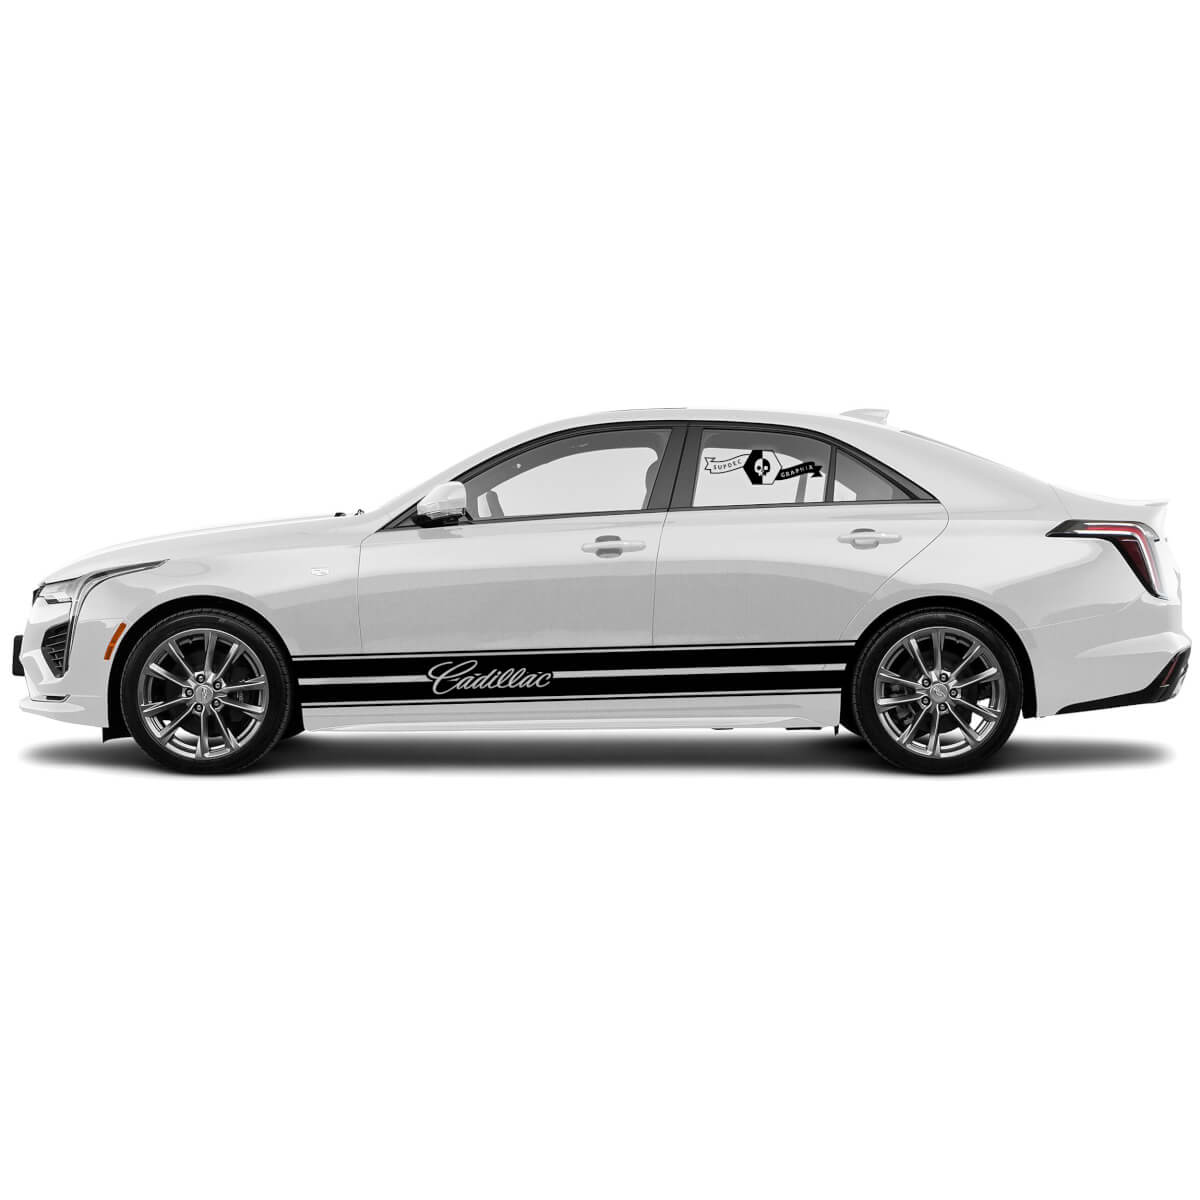 2 New Decal Sticker Stylish Doors Accent Splitted Strip vinyl Decal for Cadillac CT4
